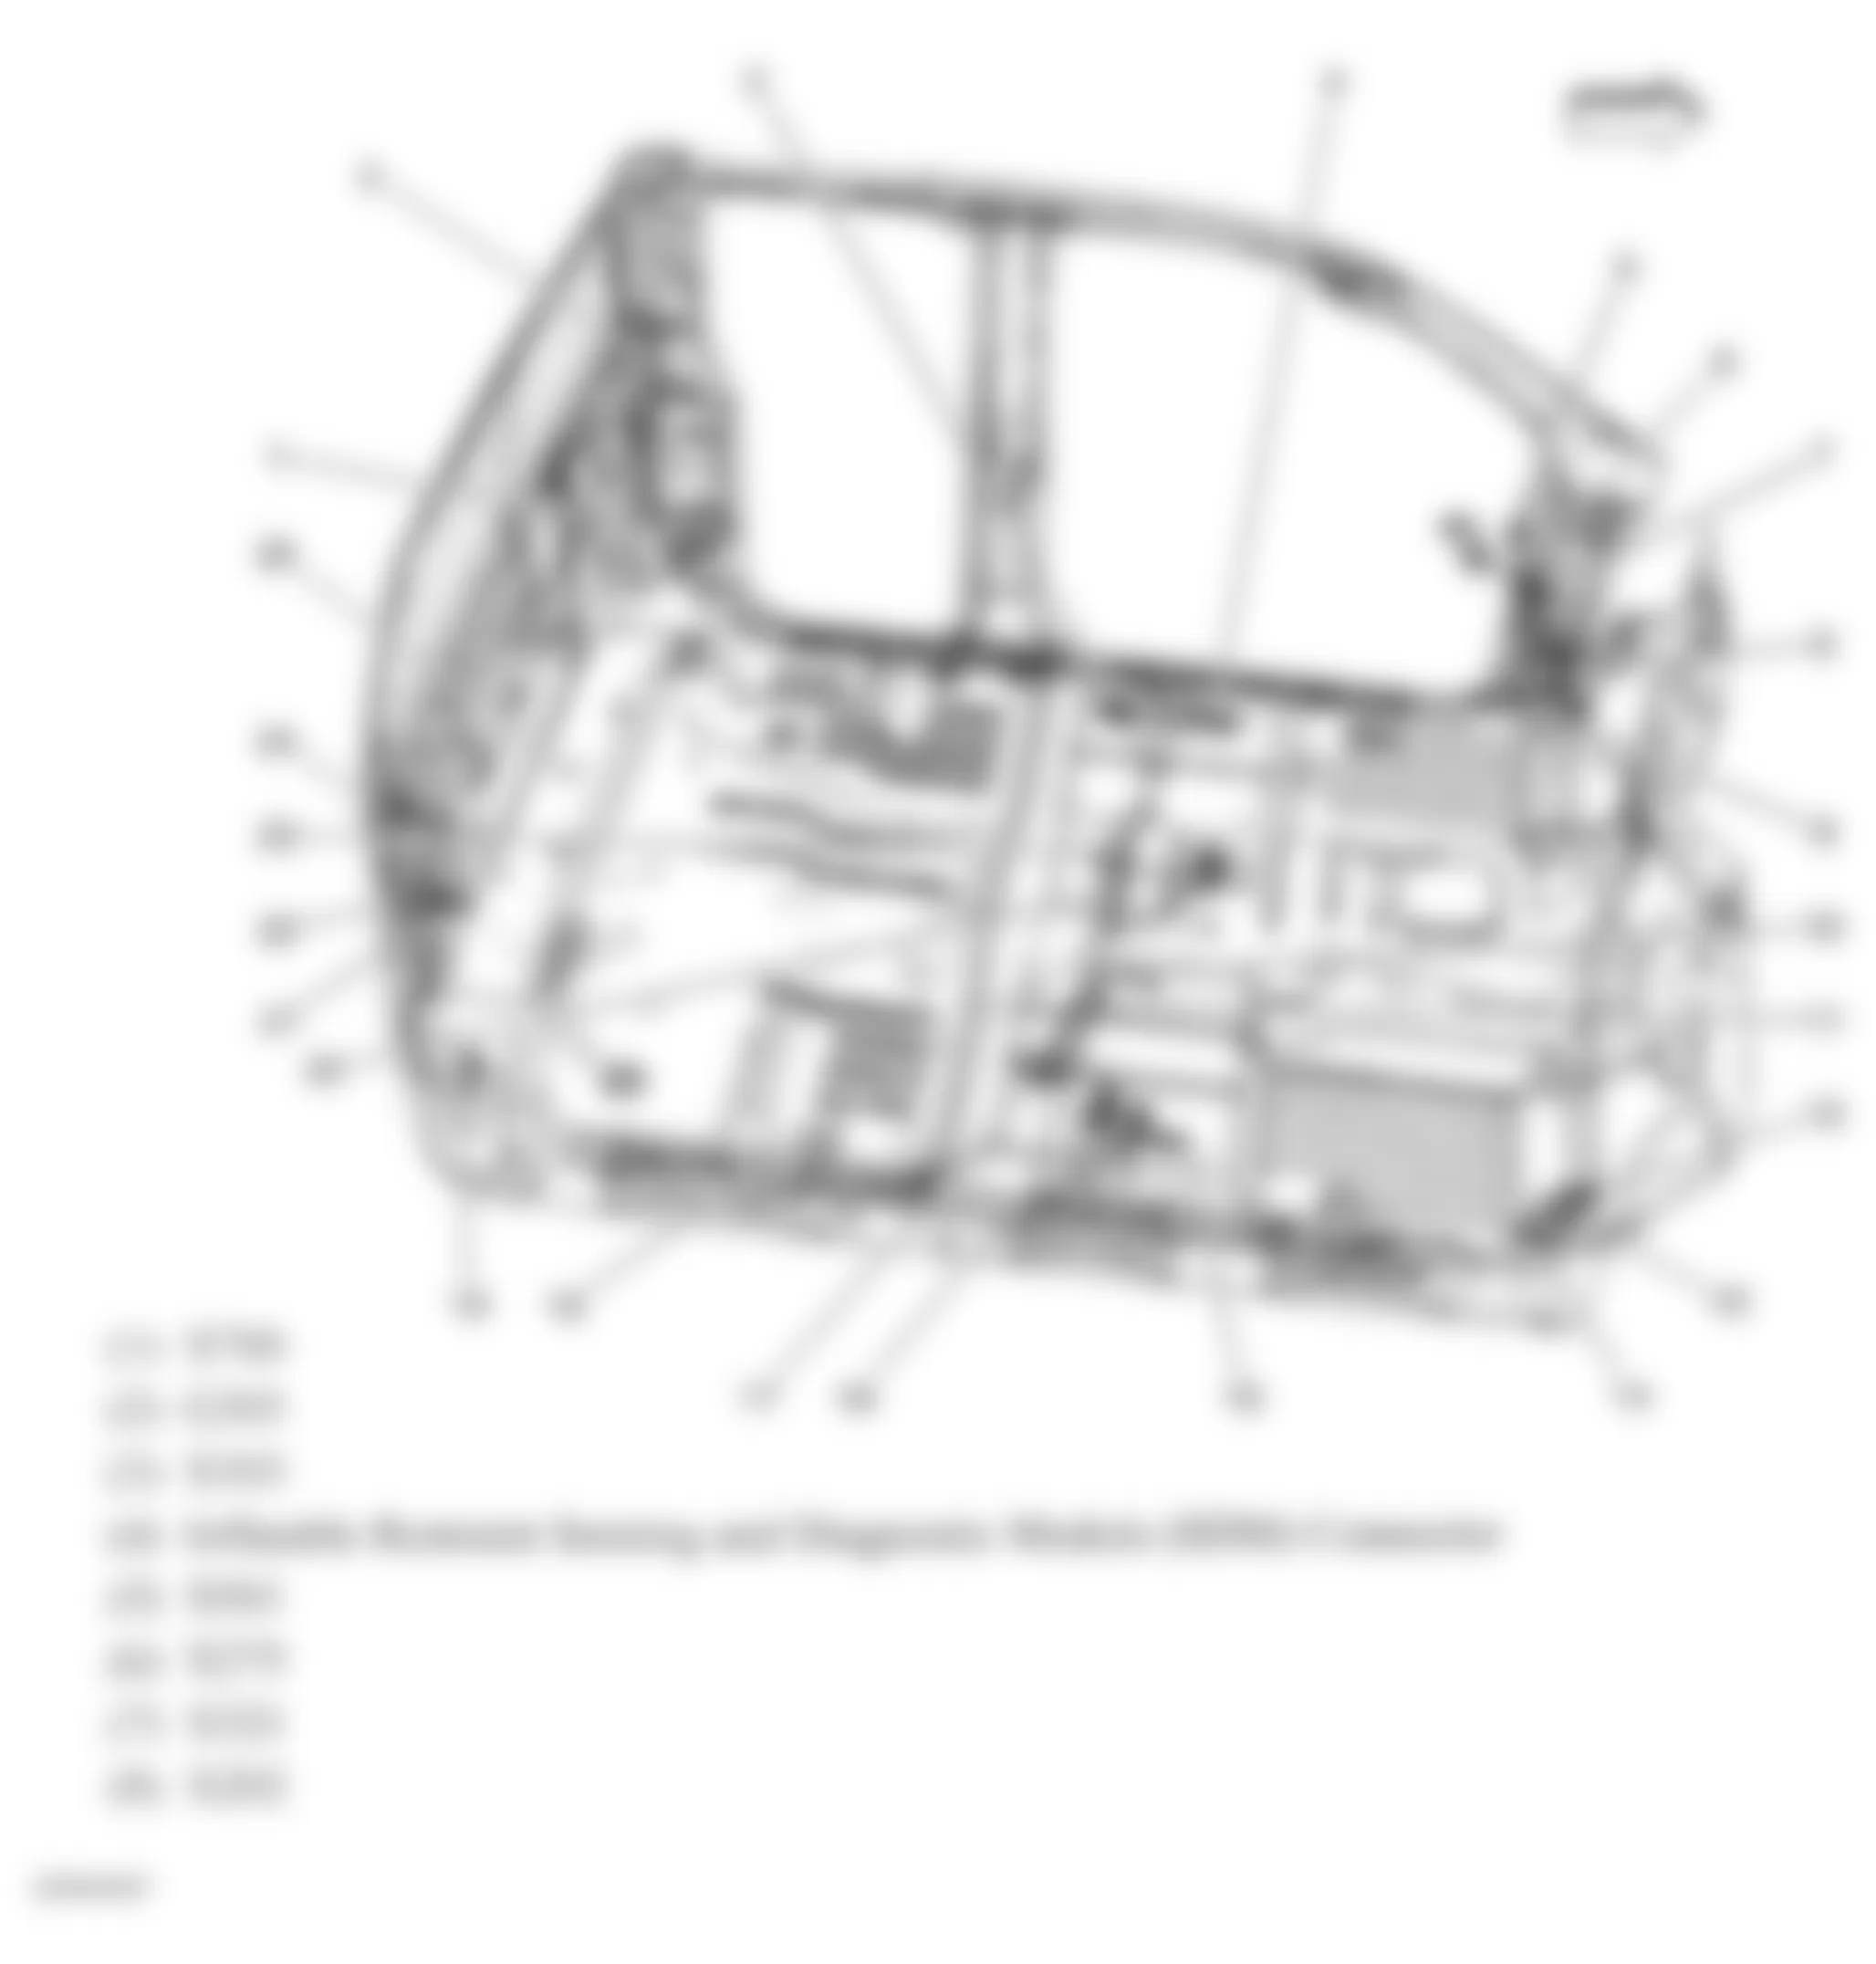 Chevrolet Silverado 3500 HD 2009 - Component Locations -  Passenger Compartment (Extended Cab) (1 Of 2)